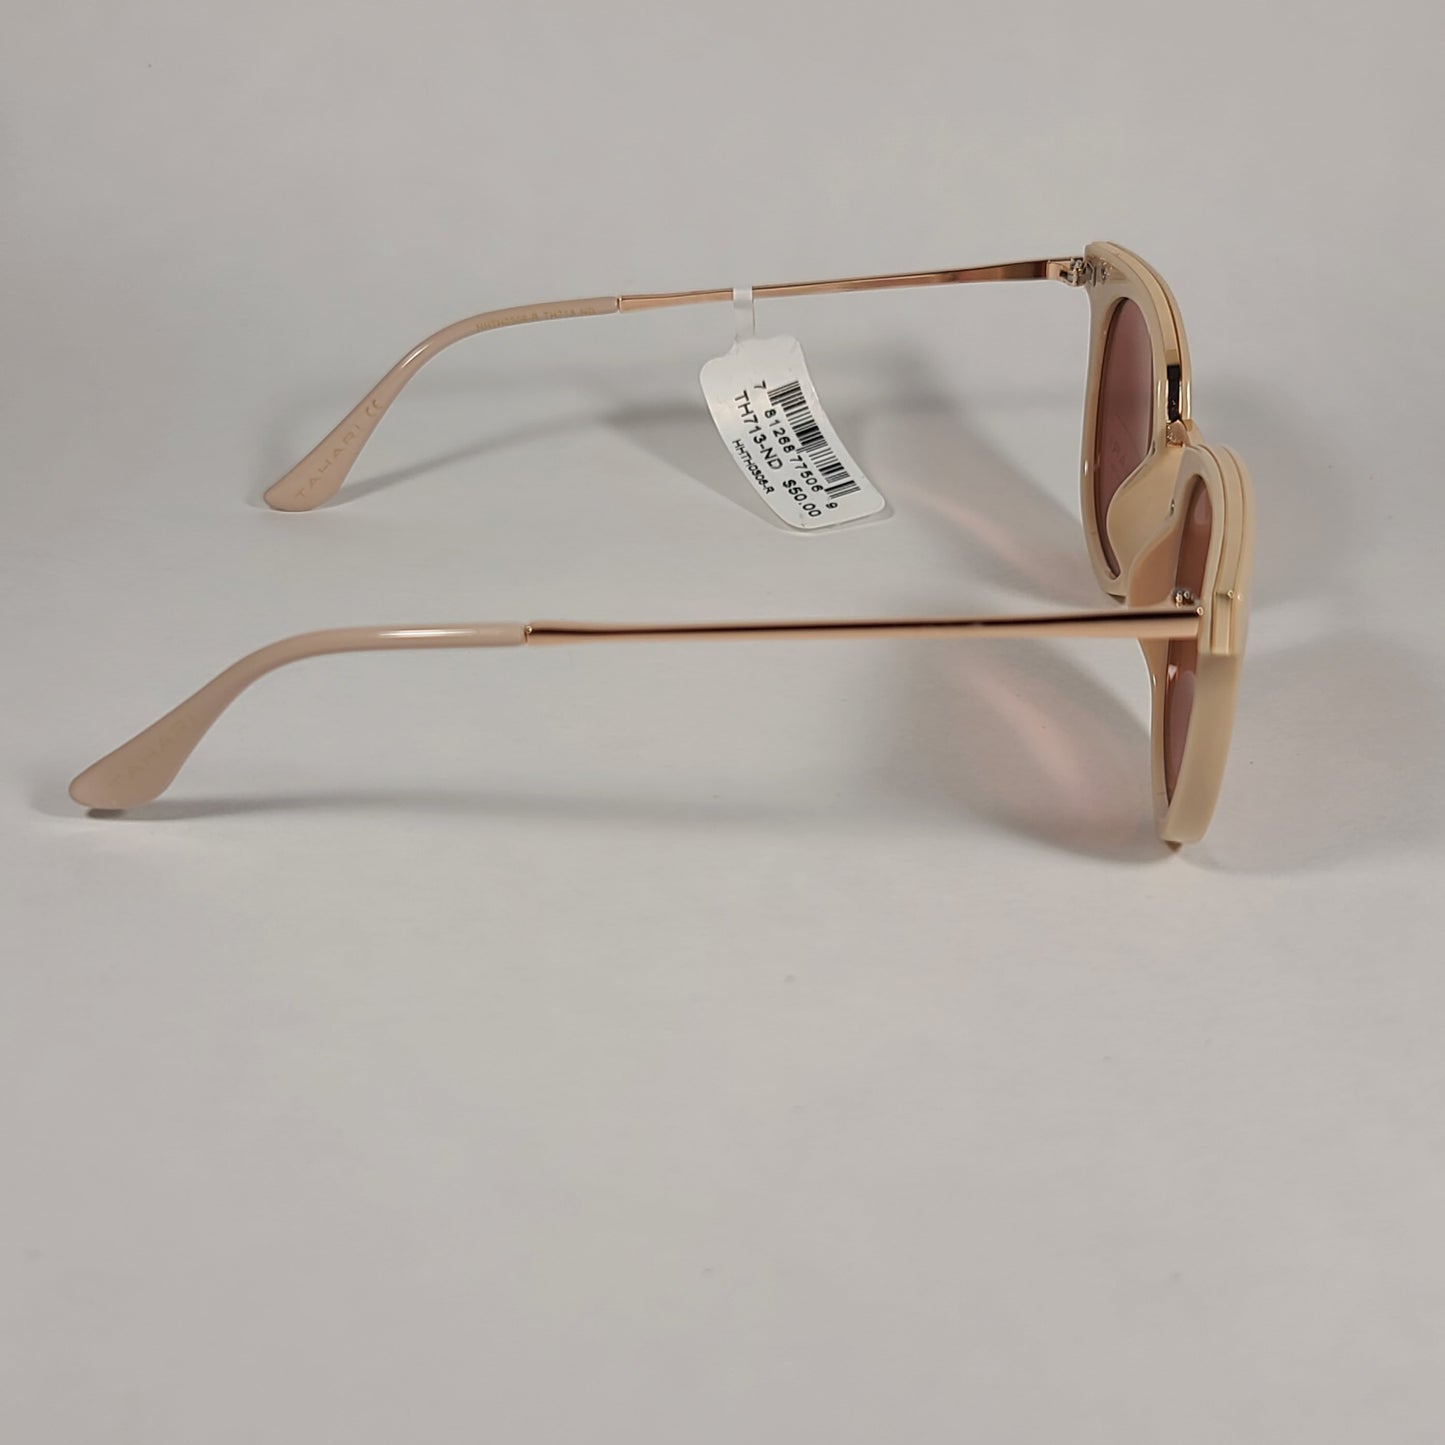 Tahari Round Sunglasses Nude And Rose Gold Frame Silver Mirror Lens TH713 ND - Sunglasses